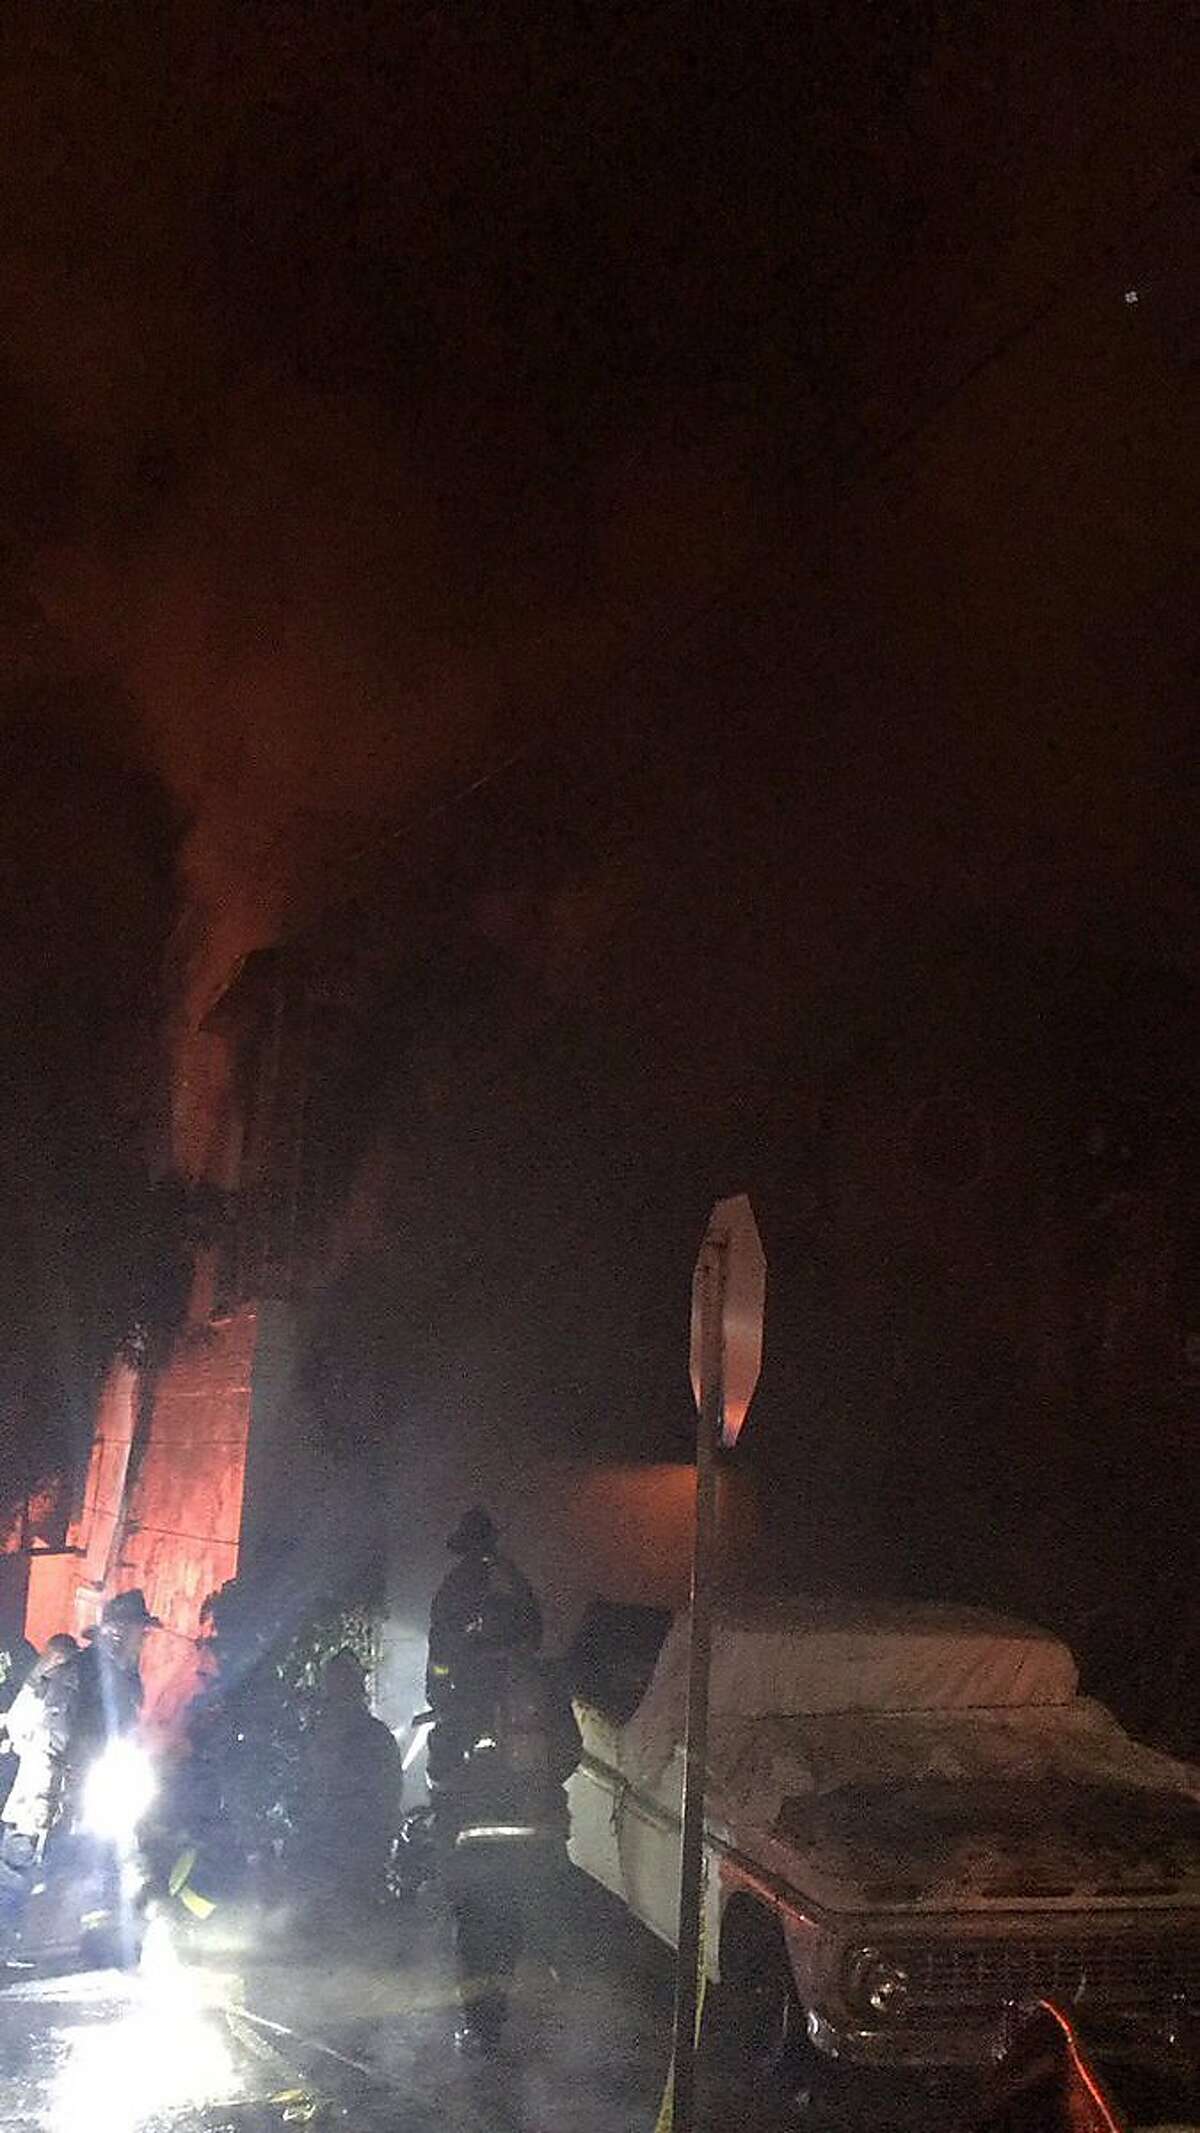 Firefighters rescued at least two people from a “fully involved” two-story home fire near Noriega Street and 35th Avenue in San Francisco shortly before 6:30 p.m. Tuesday, according to the San Francisco Fire Department. One person was sent to a local burn center with unspecified injuries, fire officials said.